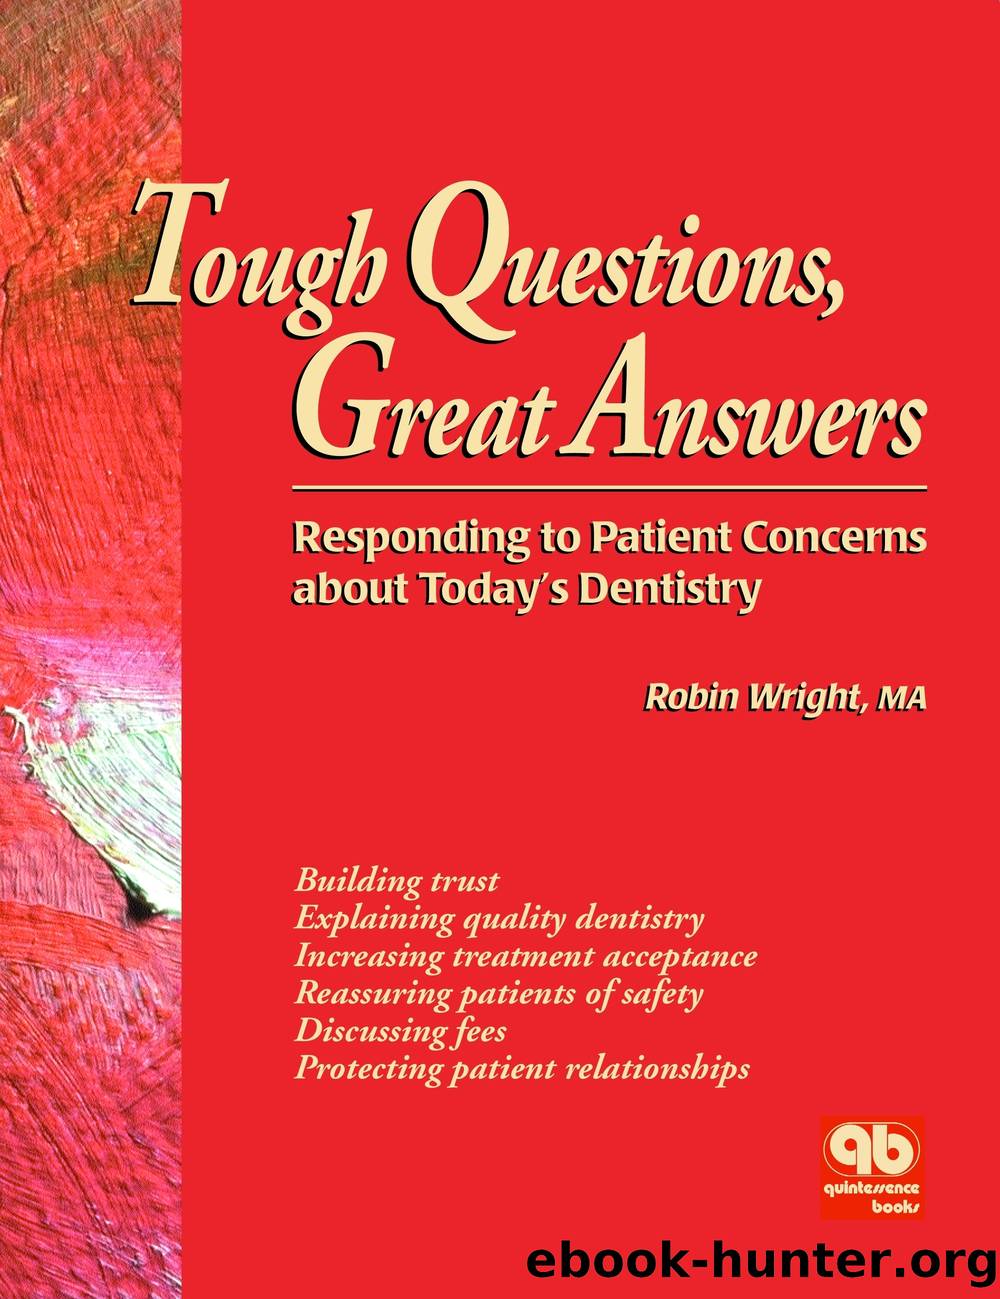 Tough Questions, Great Answers: Responding to Patient Concerns About Today's Dentistry by Robin Wright